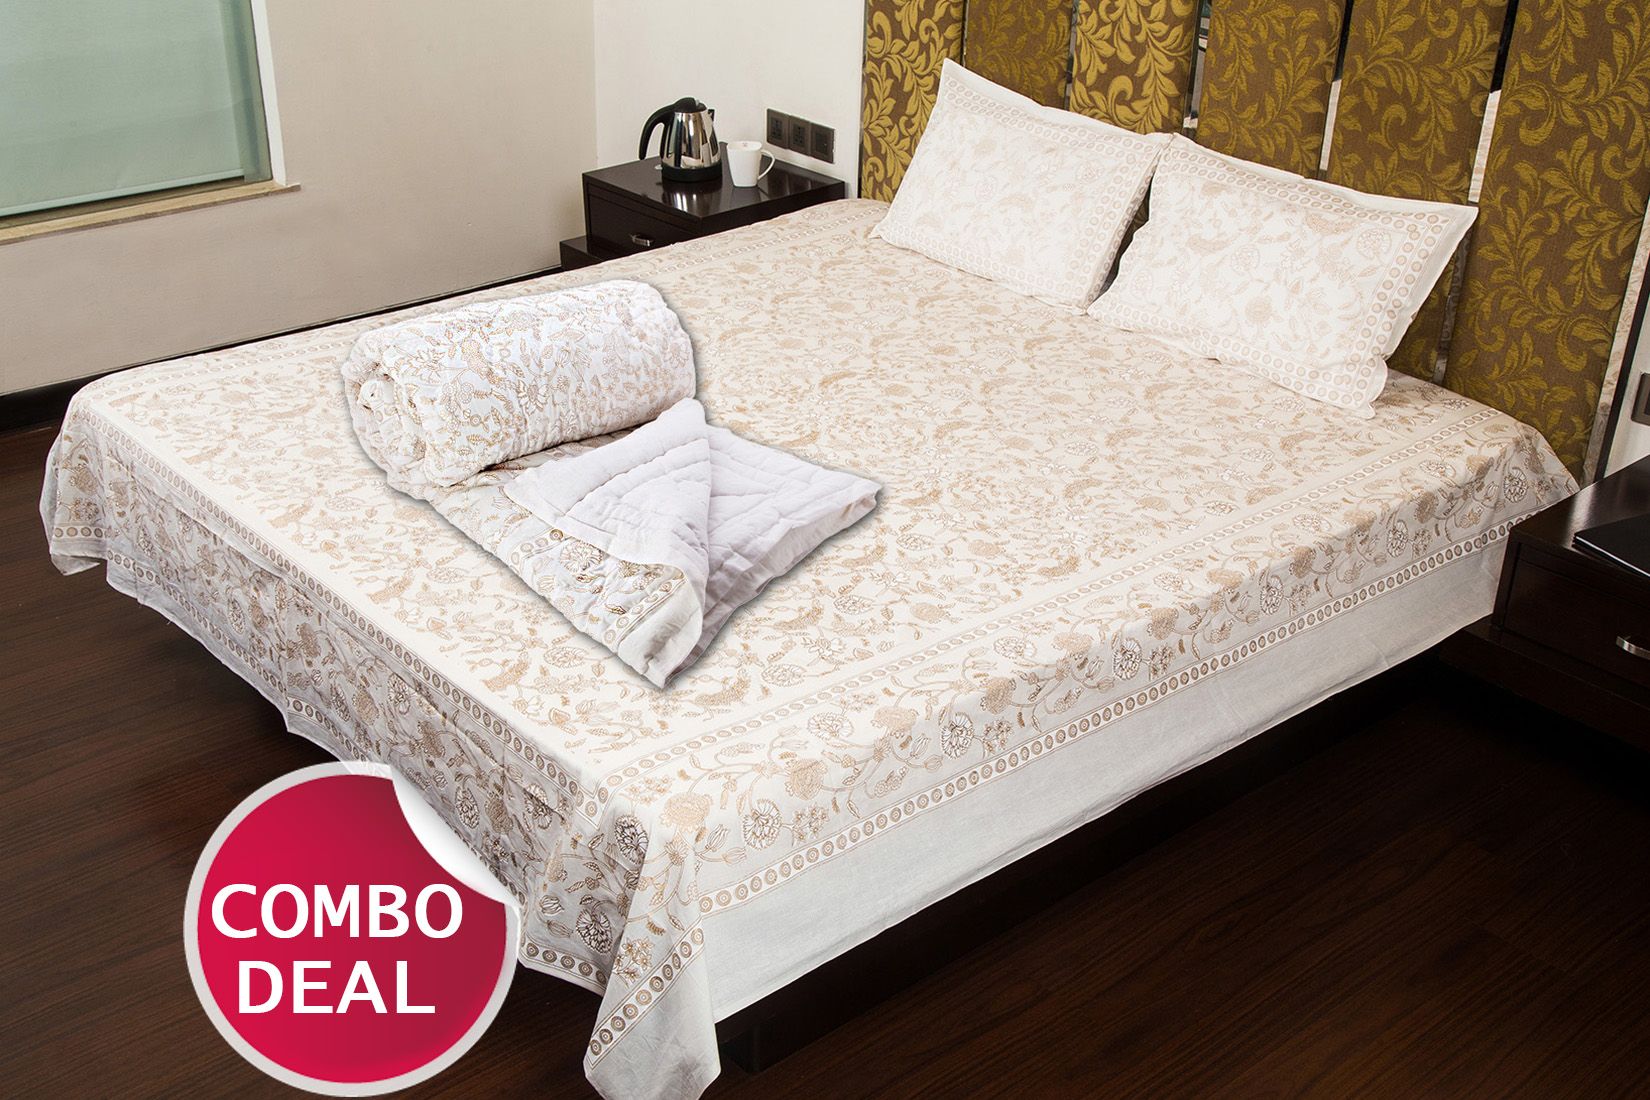 COMBO10 - Set of Double Bed Sheet & Double Bed Quilt